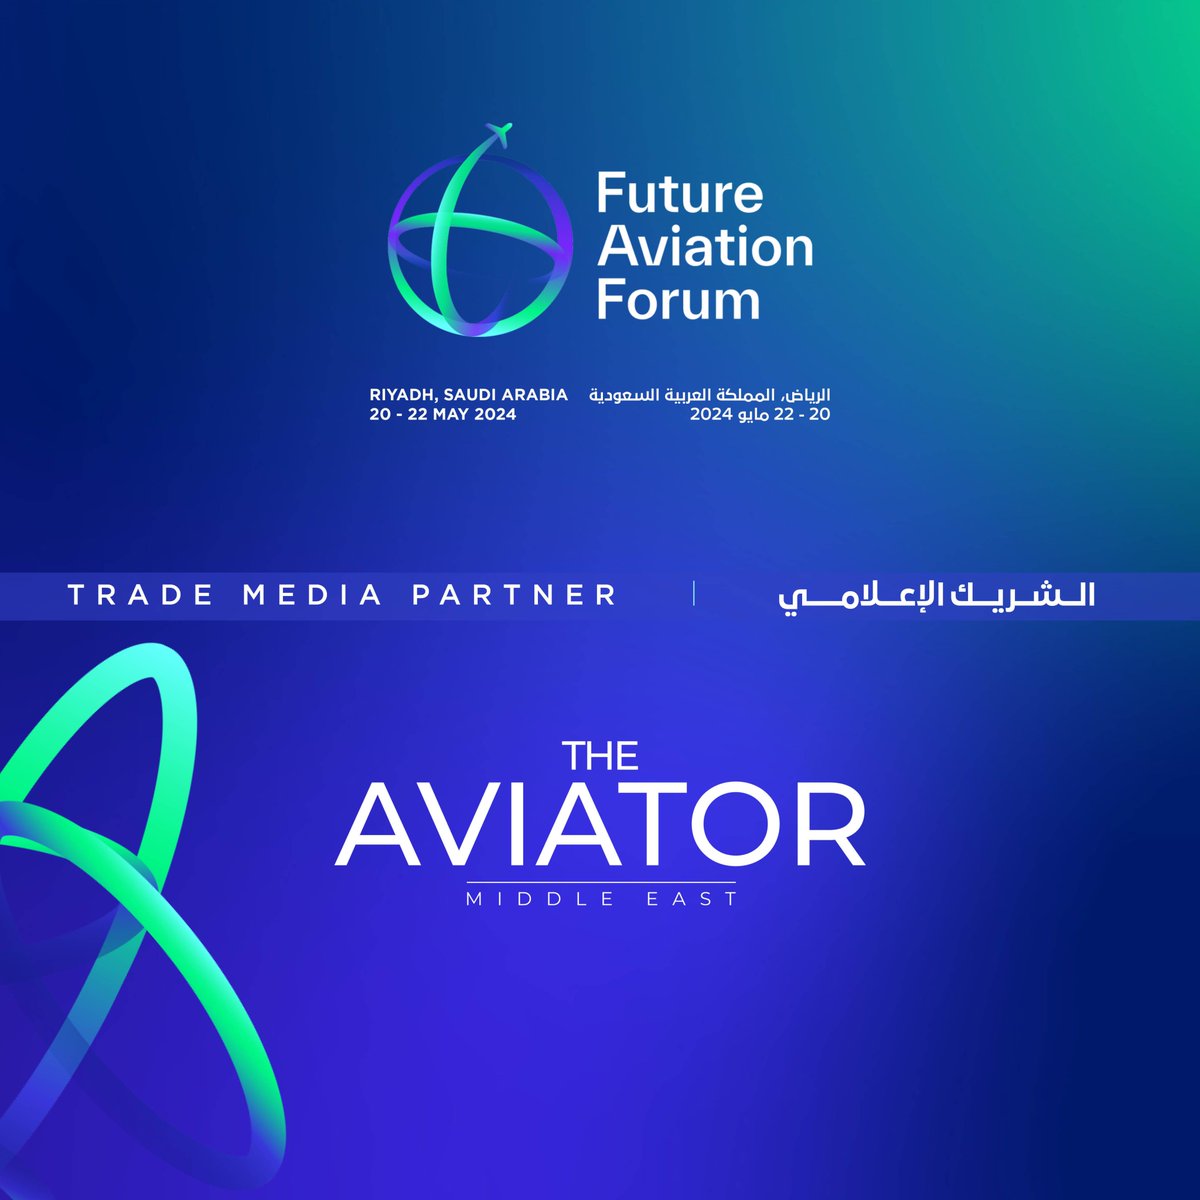 Announcing our media partnership with The Aviator Middle East for the #FutureAviationForum in #Riyadh.

Stay tuned for in-depth analysis, behind-the-scenes stories, and captivating content from the industry.

Register now at futureaviationforum.com.

#FAF24